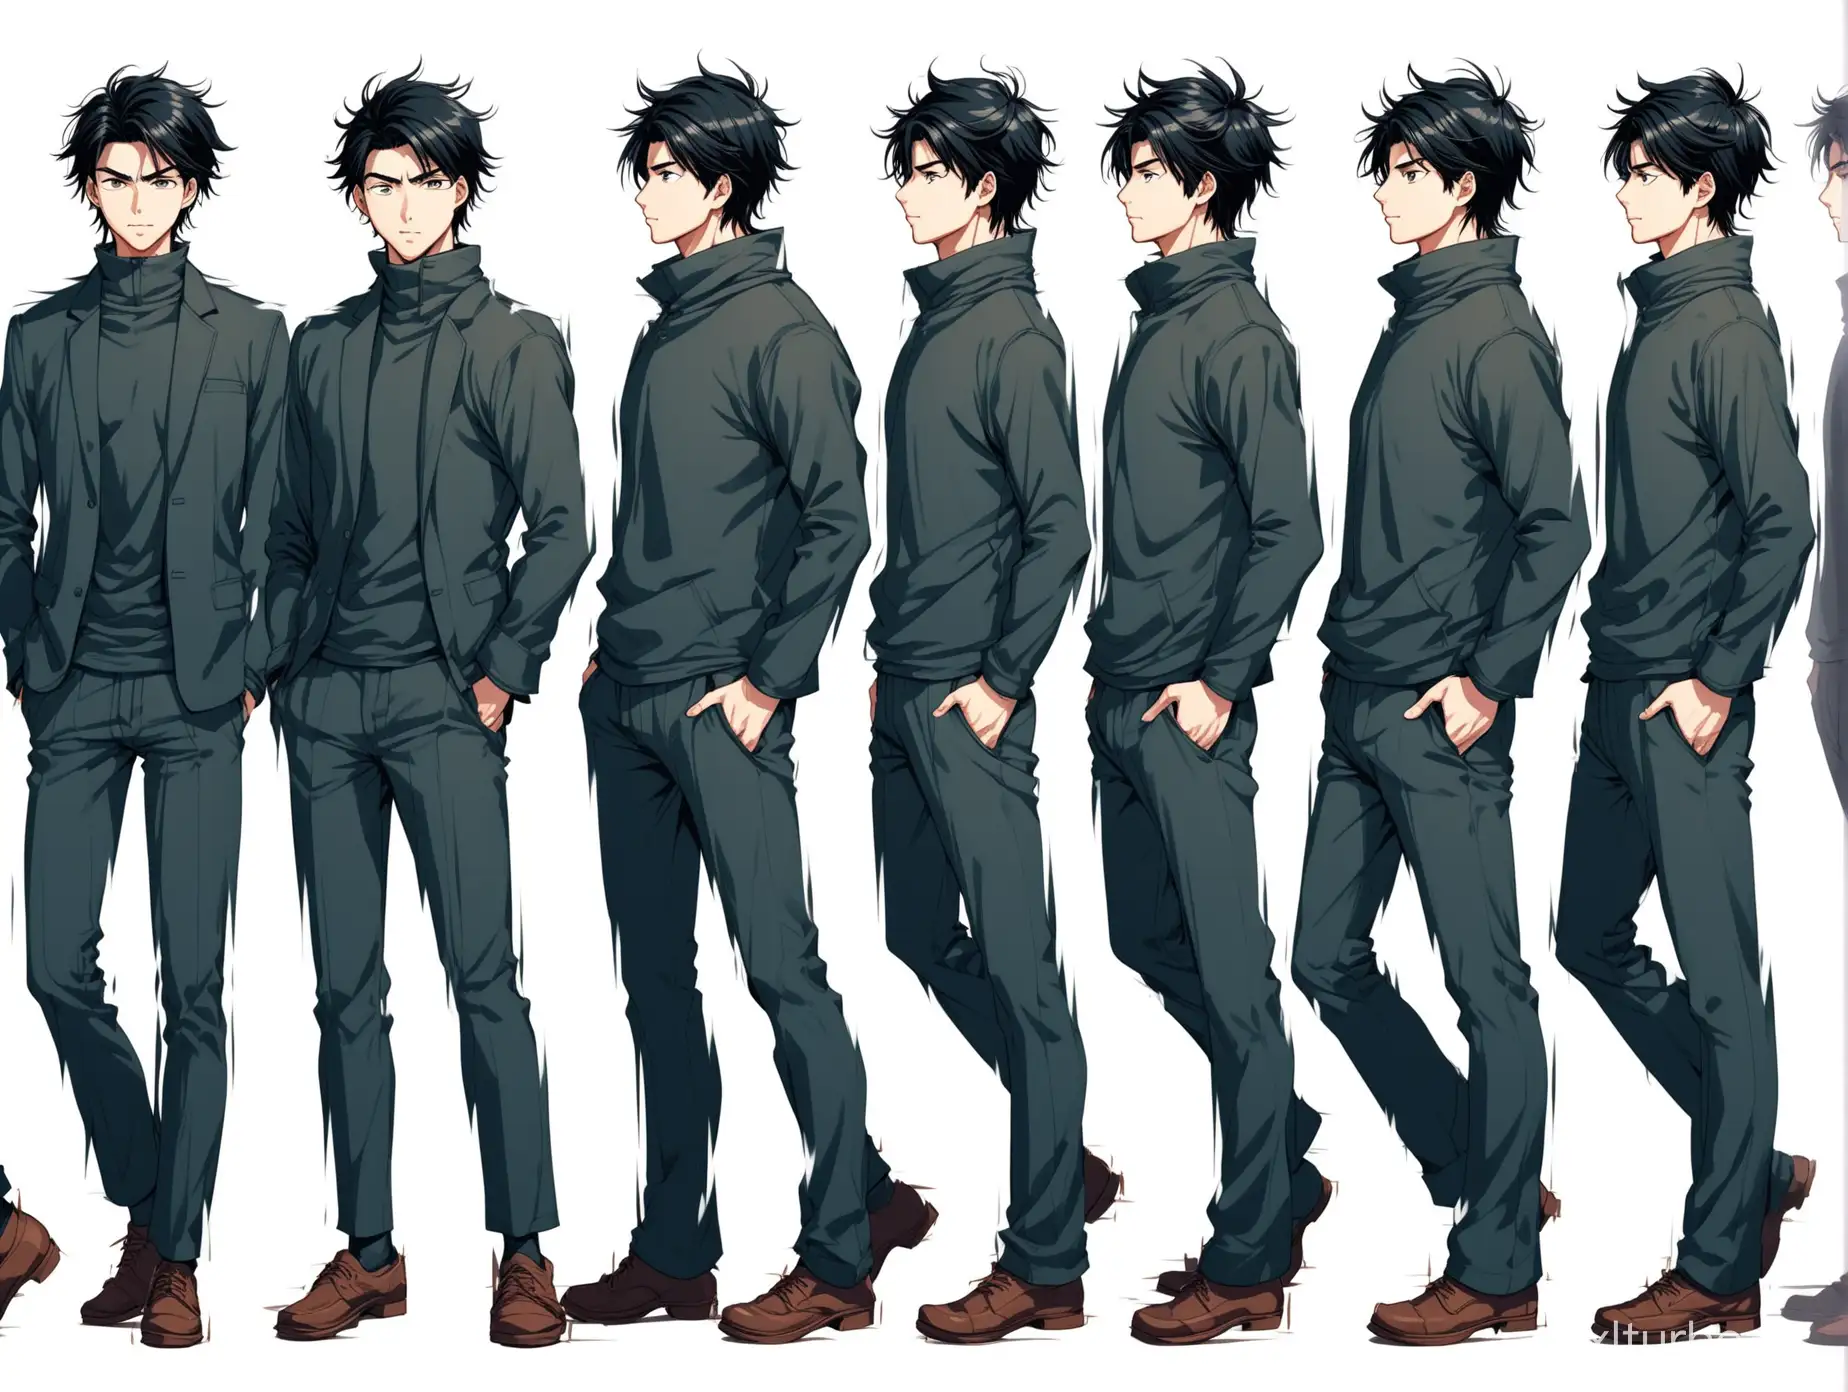 Dynamic-Manga-Style-Illustrations-of-a-Tall-Young-Man-in-Winter-Apparel